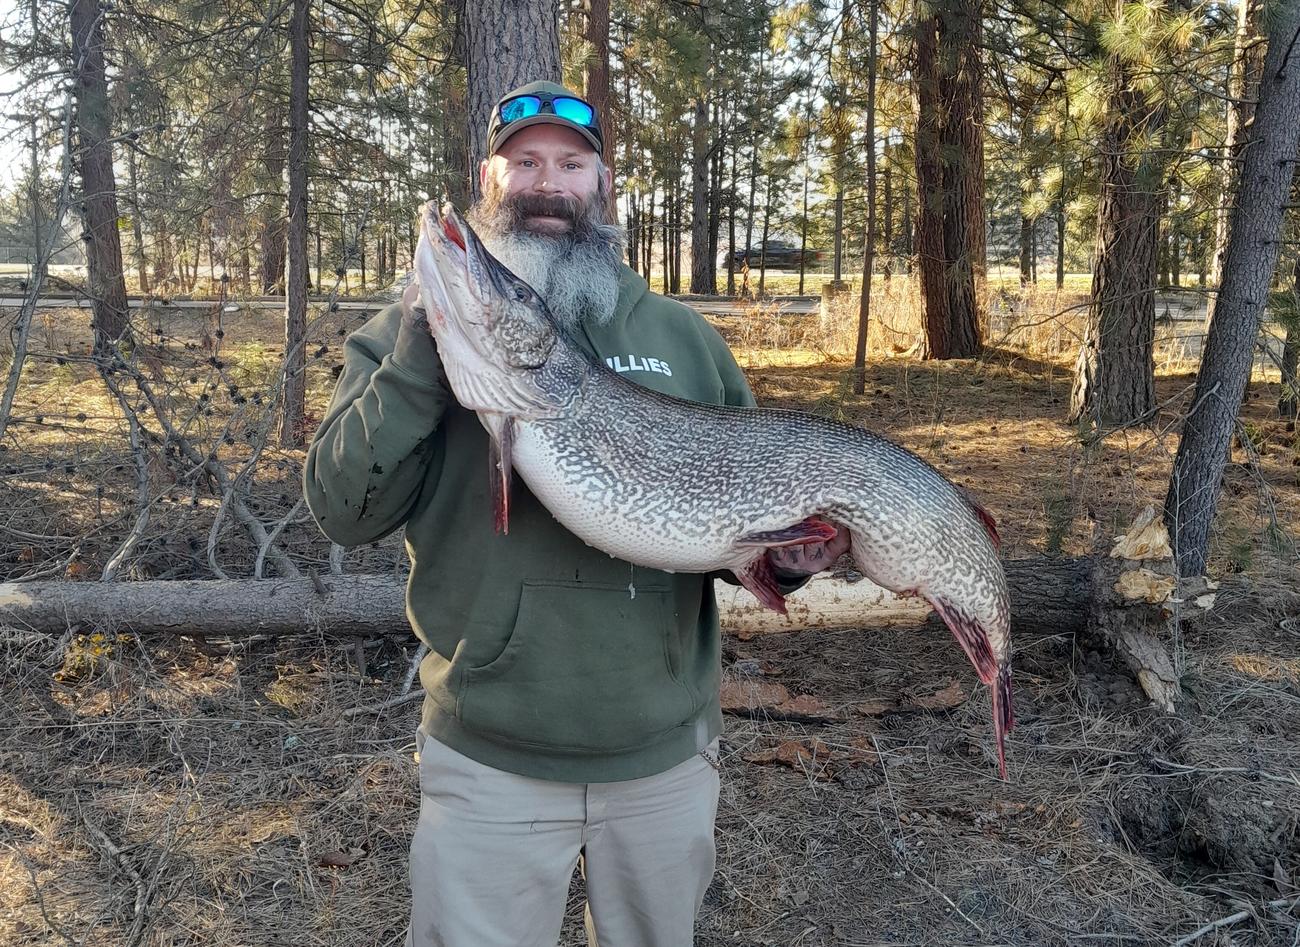 North Idaho Angler Breaks State Record with “True Monster” of a Northern Pike